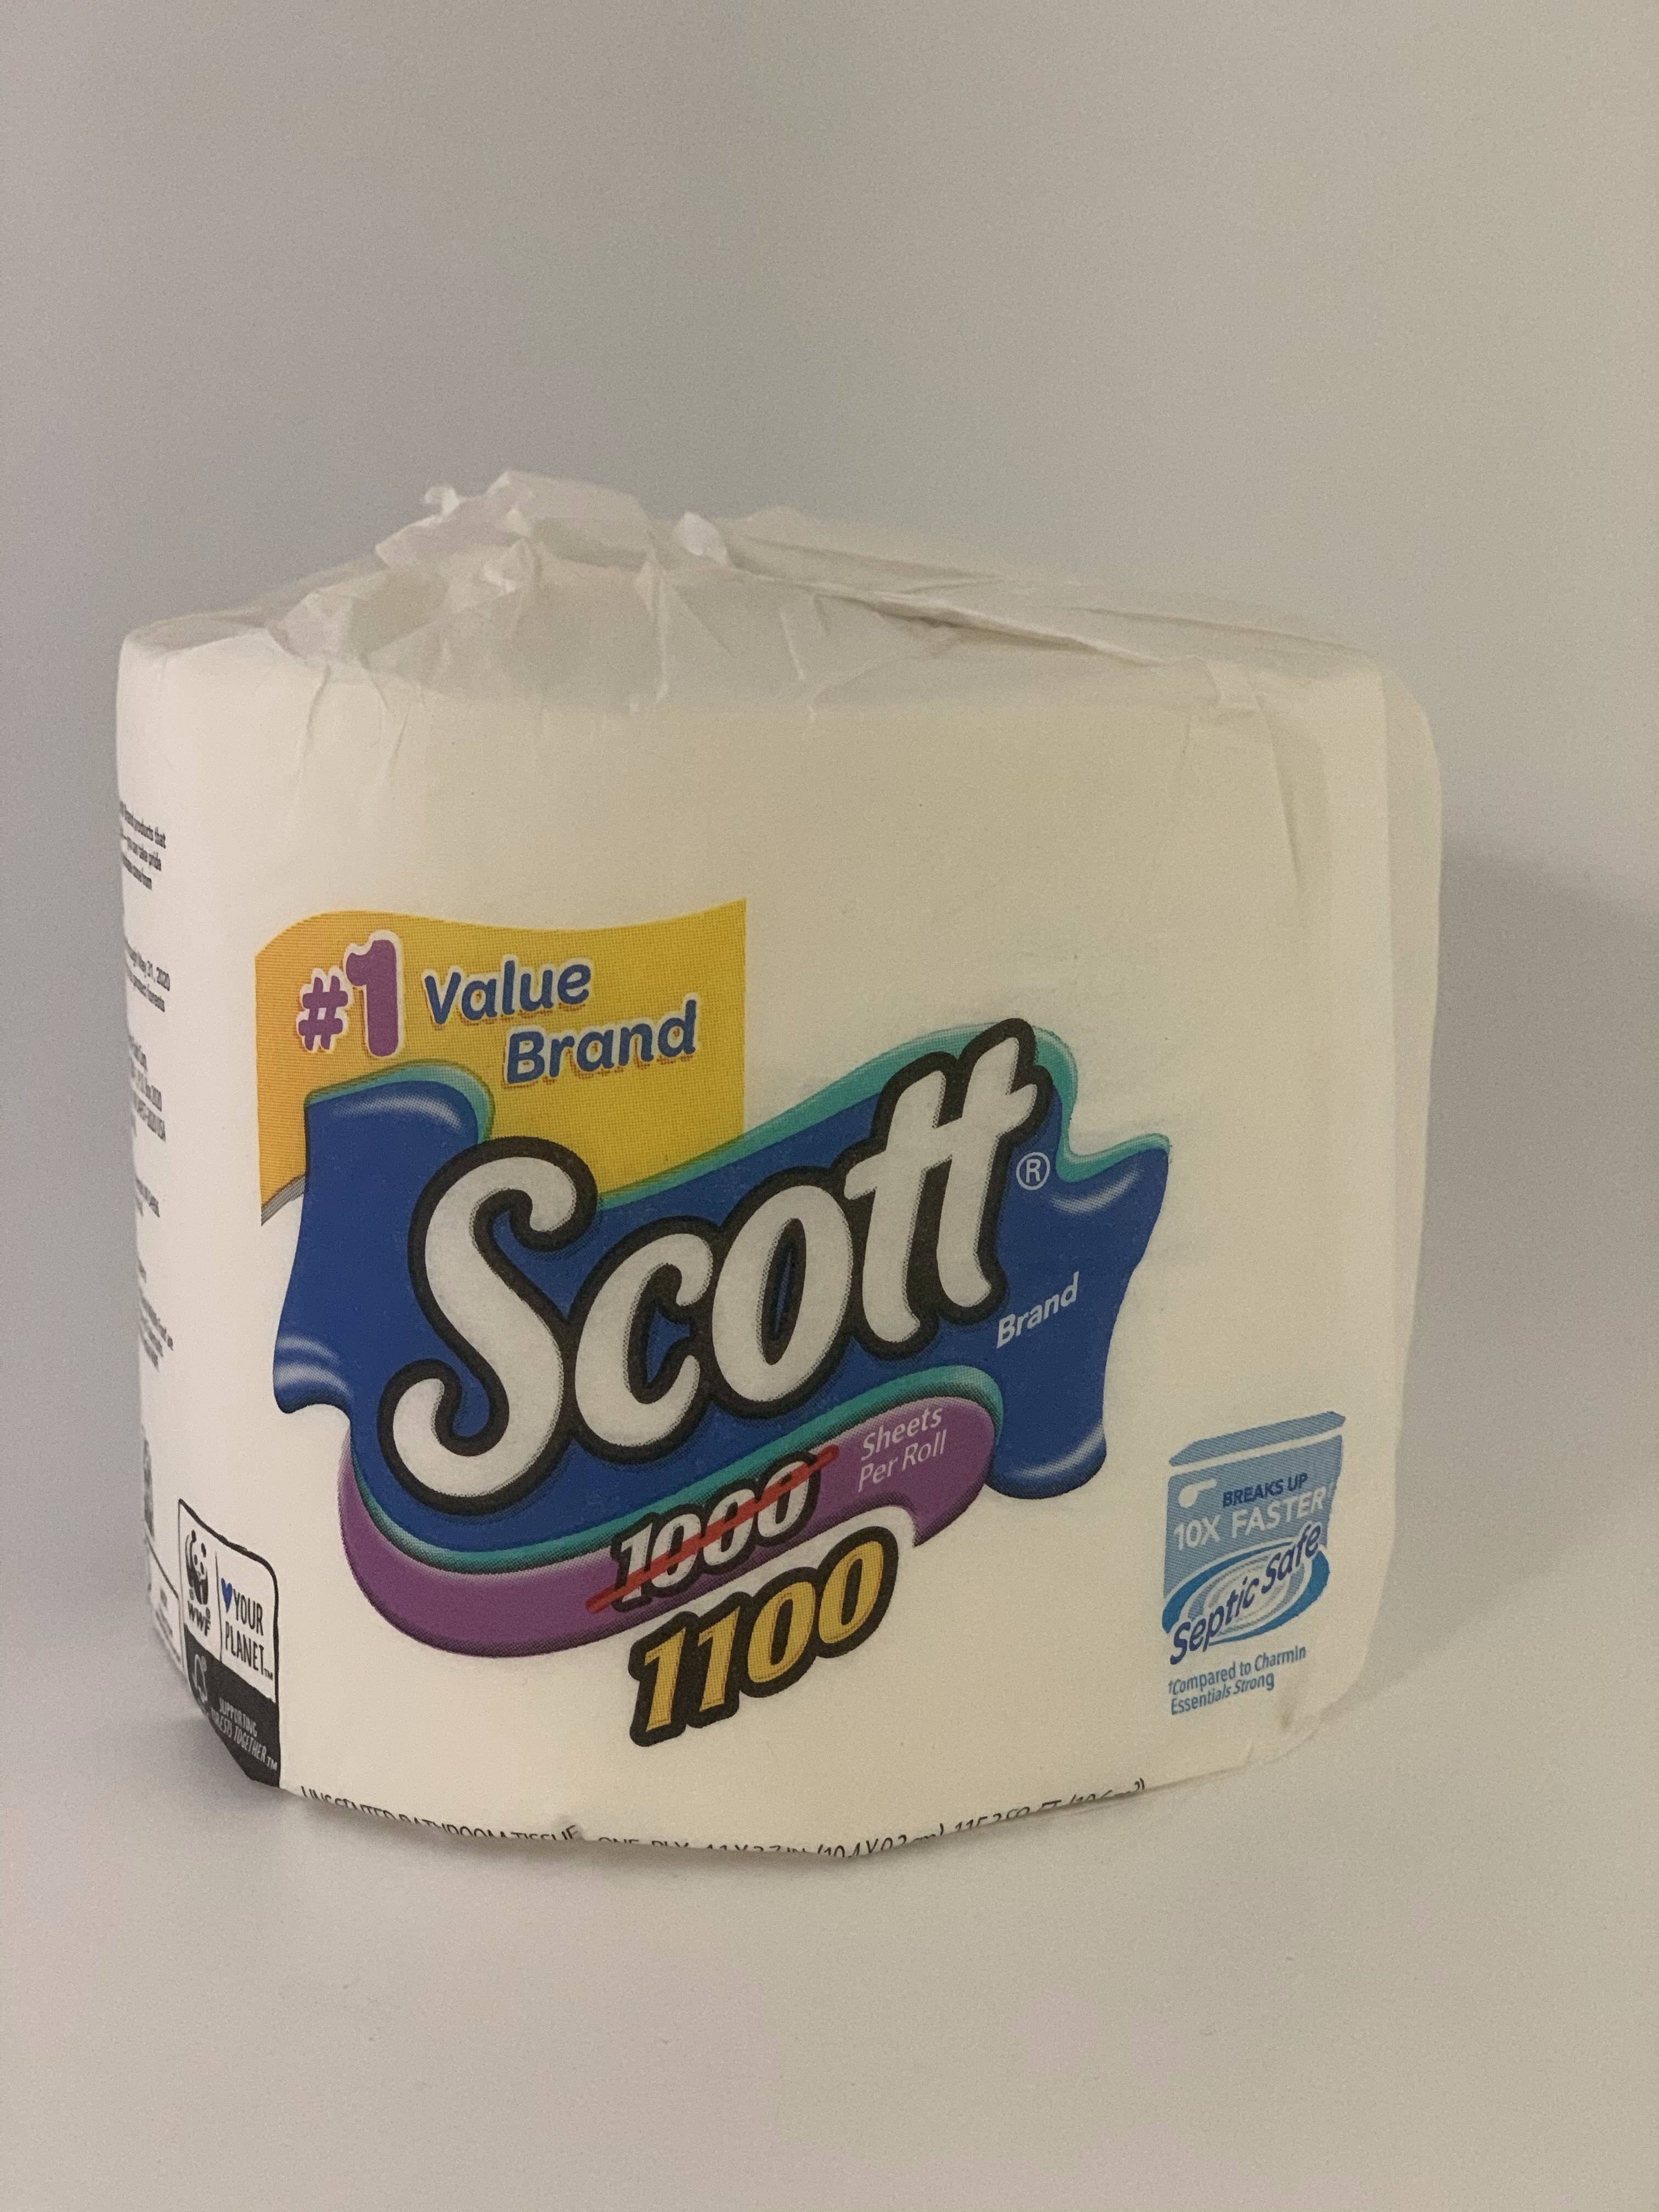 4 Scott Extra Value Pack, 2-Ply 20 Rolls, 180 Sheets per Roll, Toilet